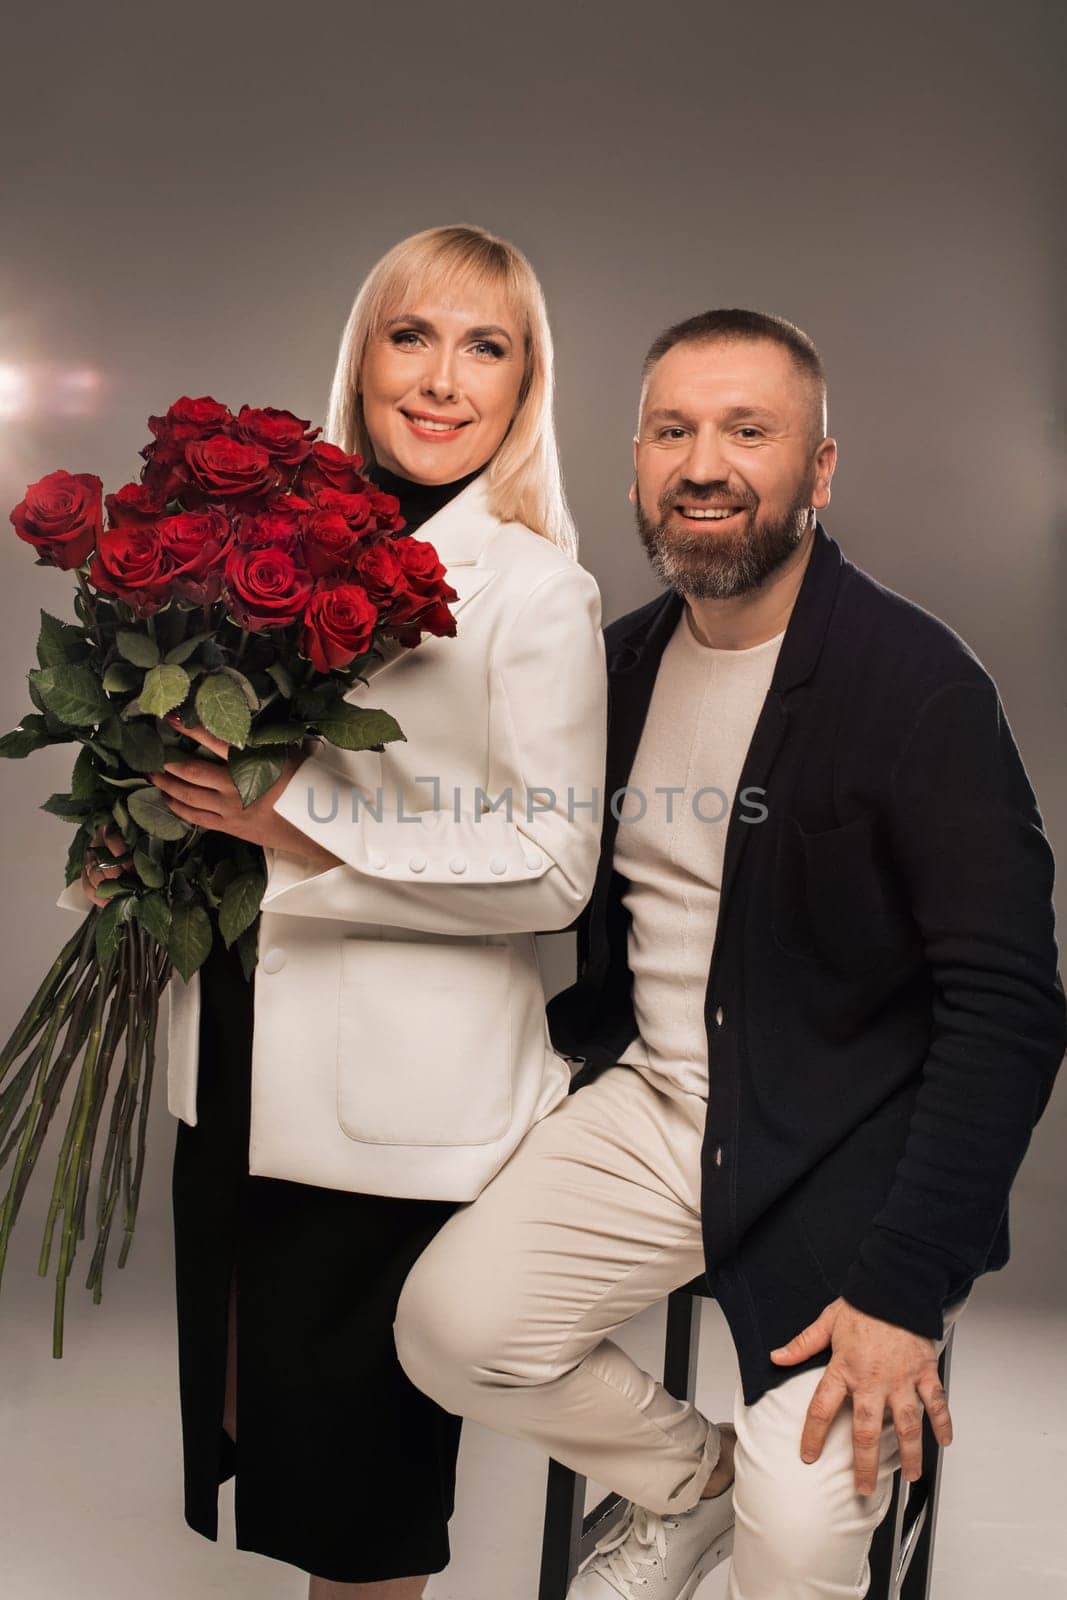 A man and a woman with flowers in their hands in strict clothes pose in the background in the studio by Lobachad